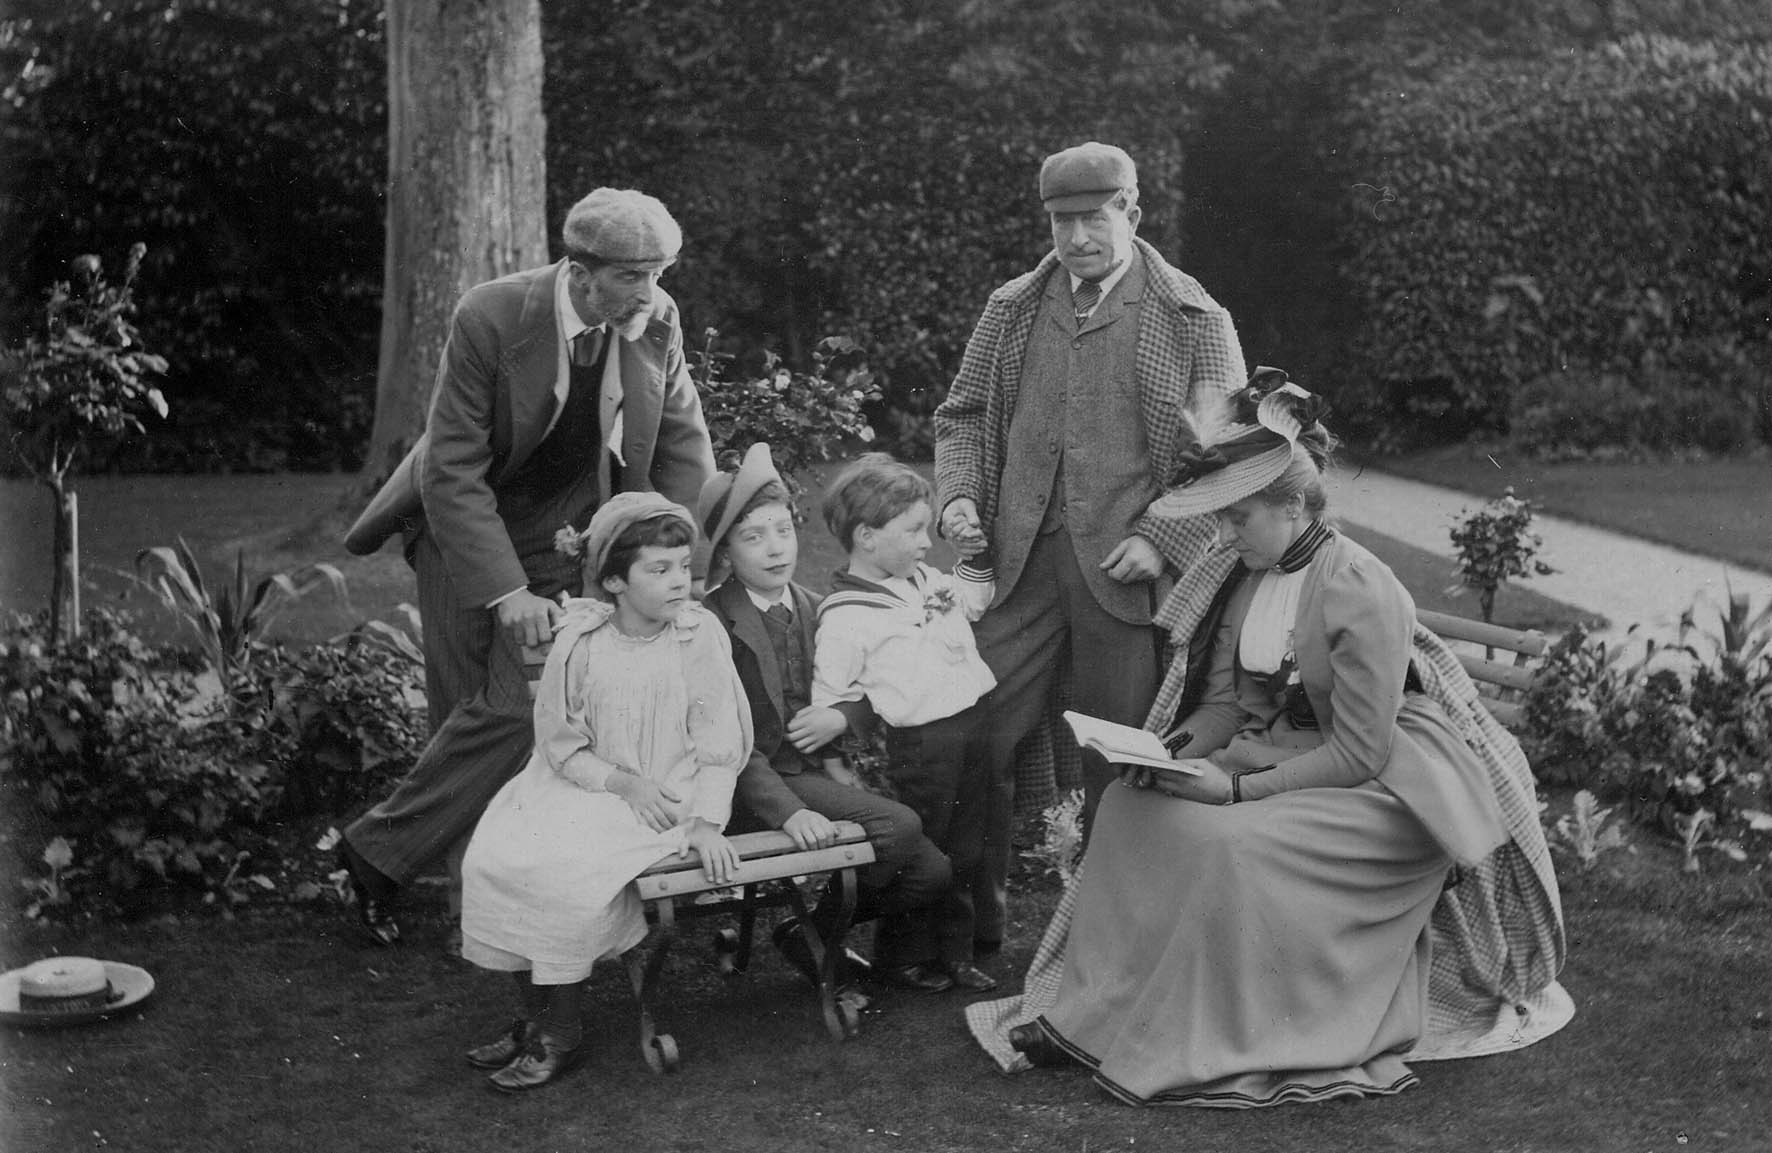 Bridget Talbot, front left, as a child with her family